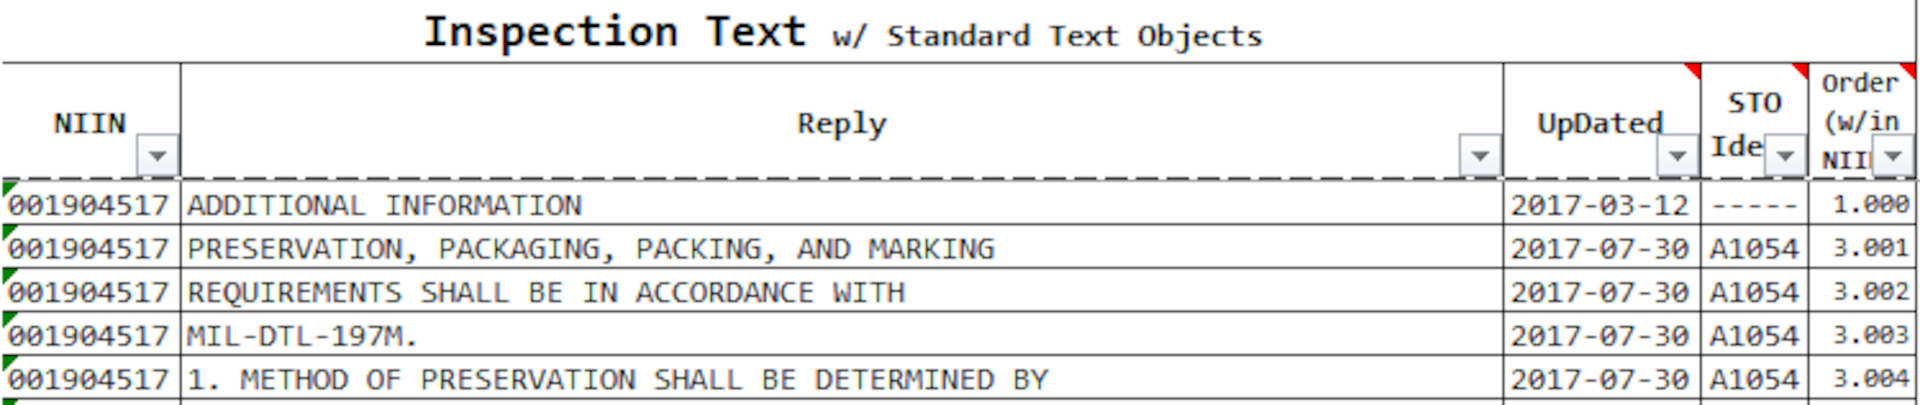 Example of Inspection Text with Standard Text Objects in excel spreadsheet format.